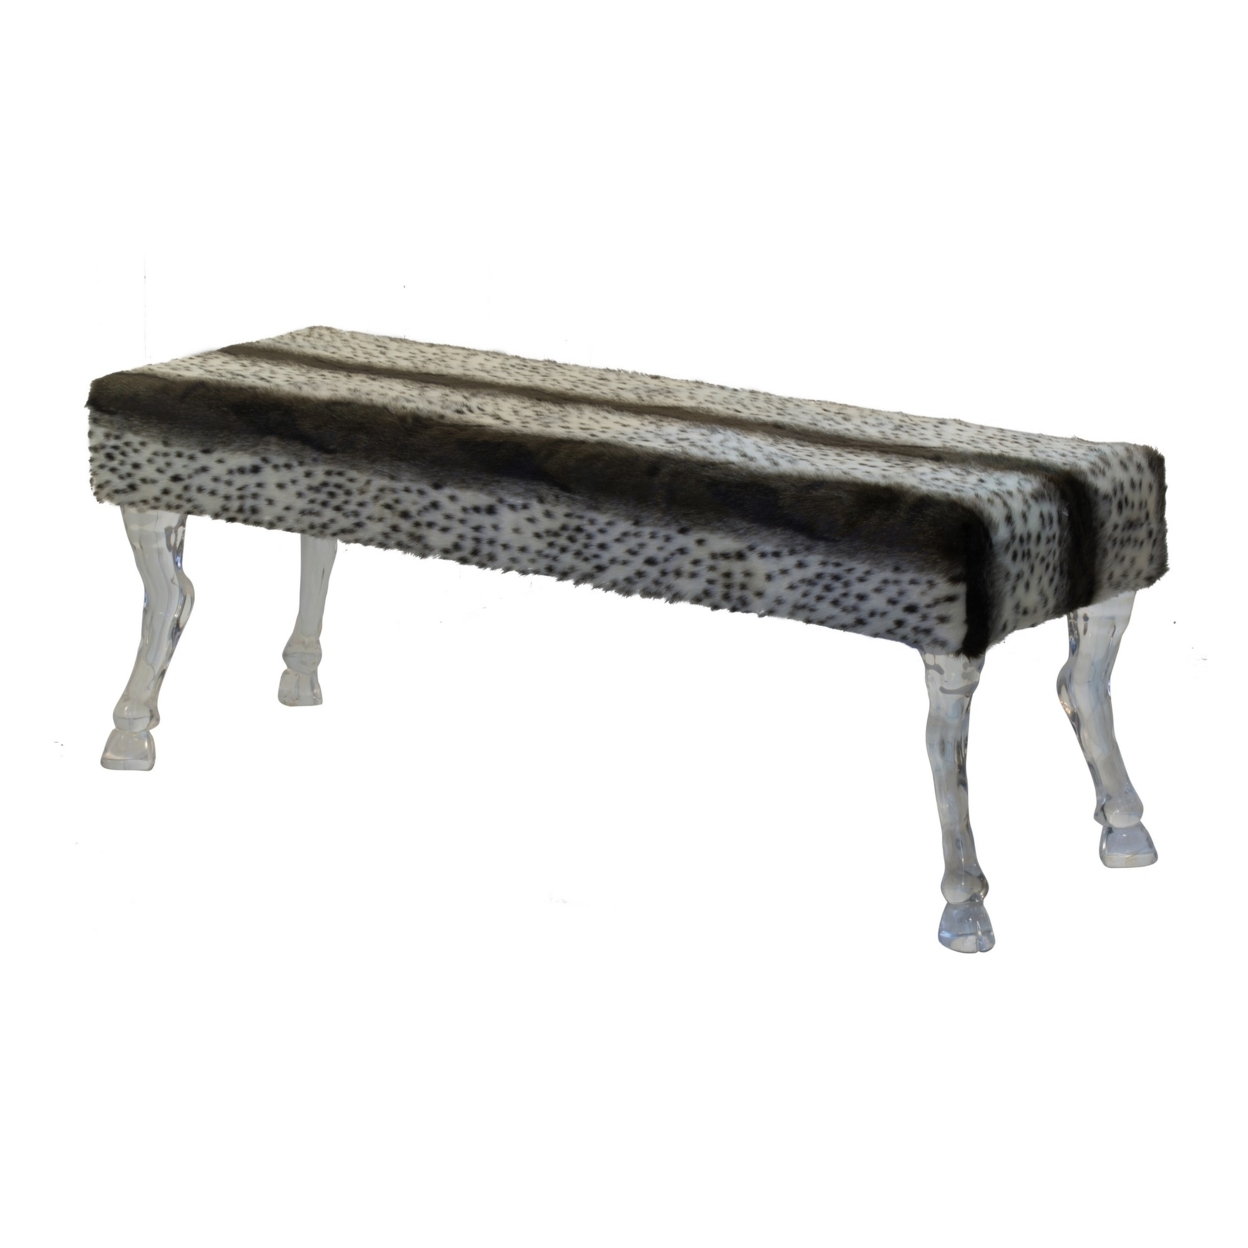 49 Inch Modern Accent Bench, Acrylic Hooved Legs, Faux Fur Gray Upholstery- Saltoro Sherpi